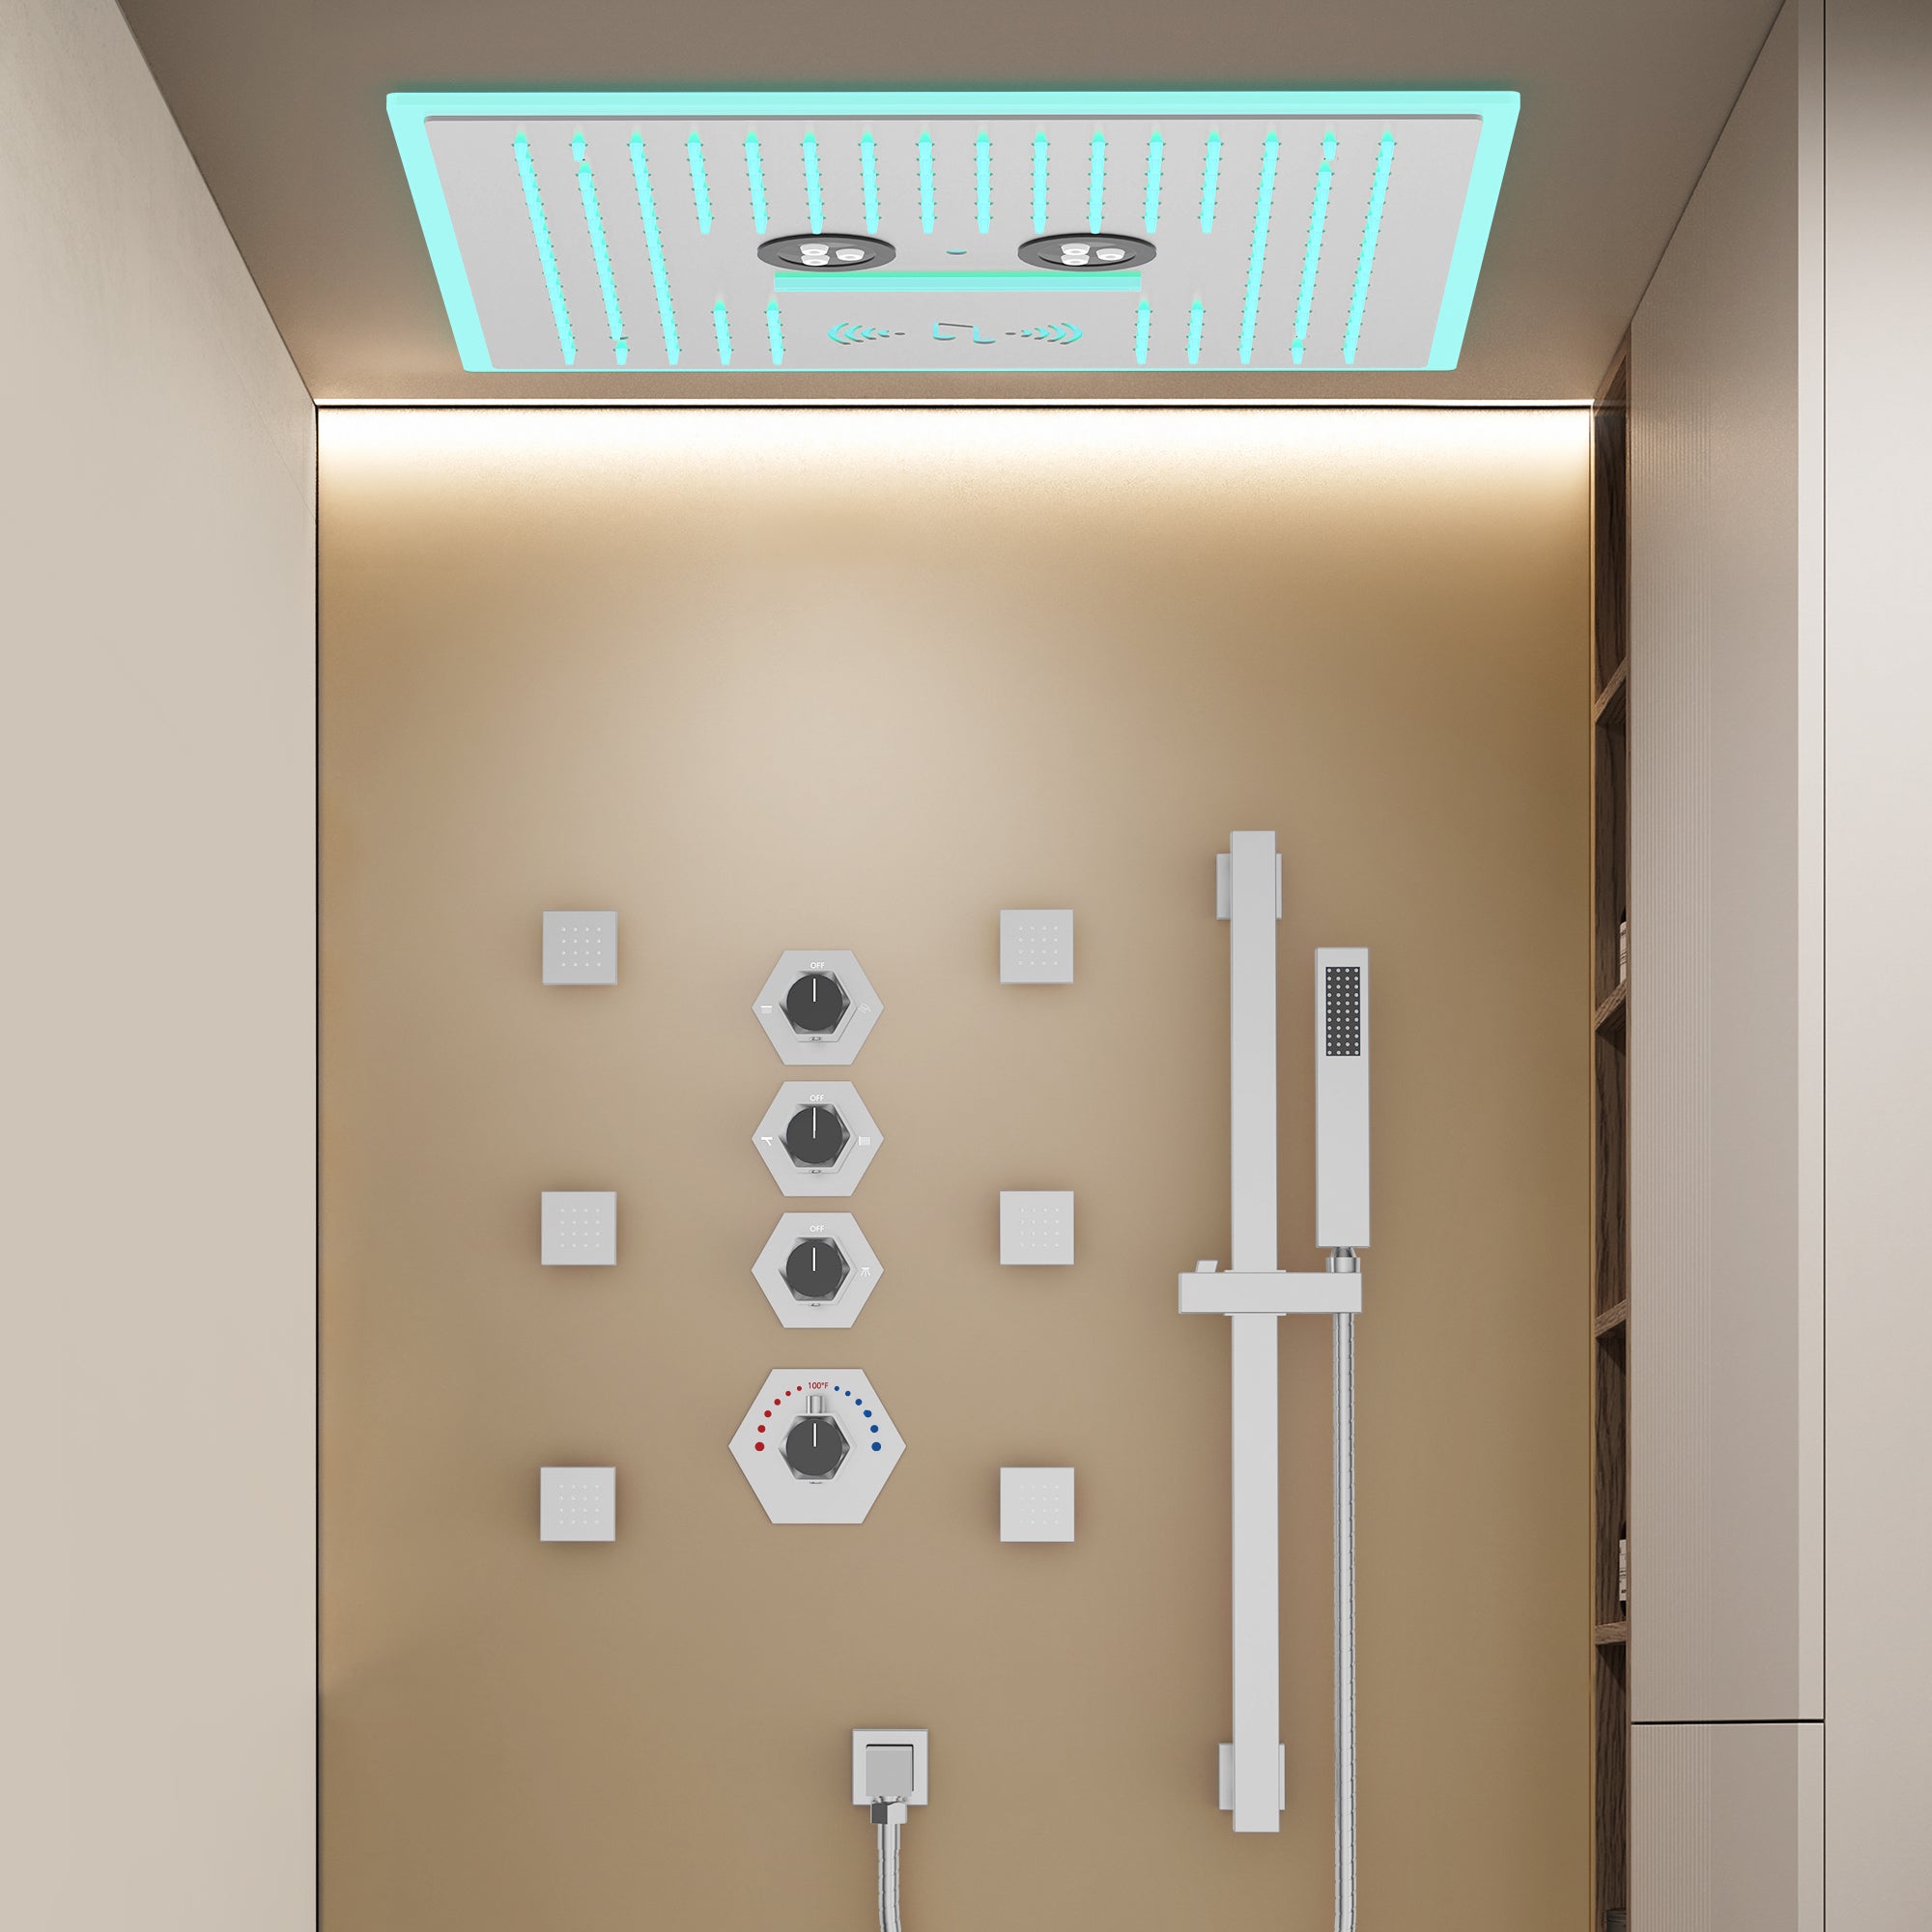 EVERSTEIN SFS-1047-NK16 16" High-Pressure Rainfall Complete Shower System with Bluetooth Music and LED